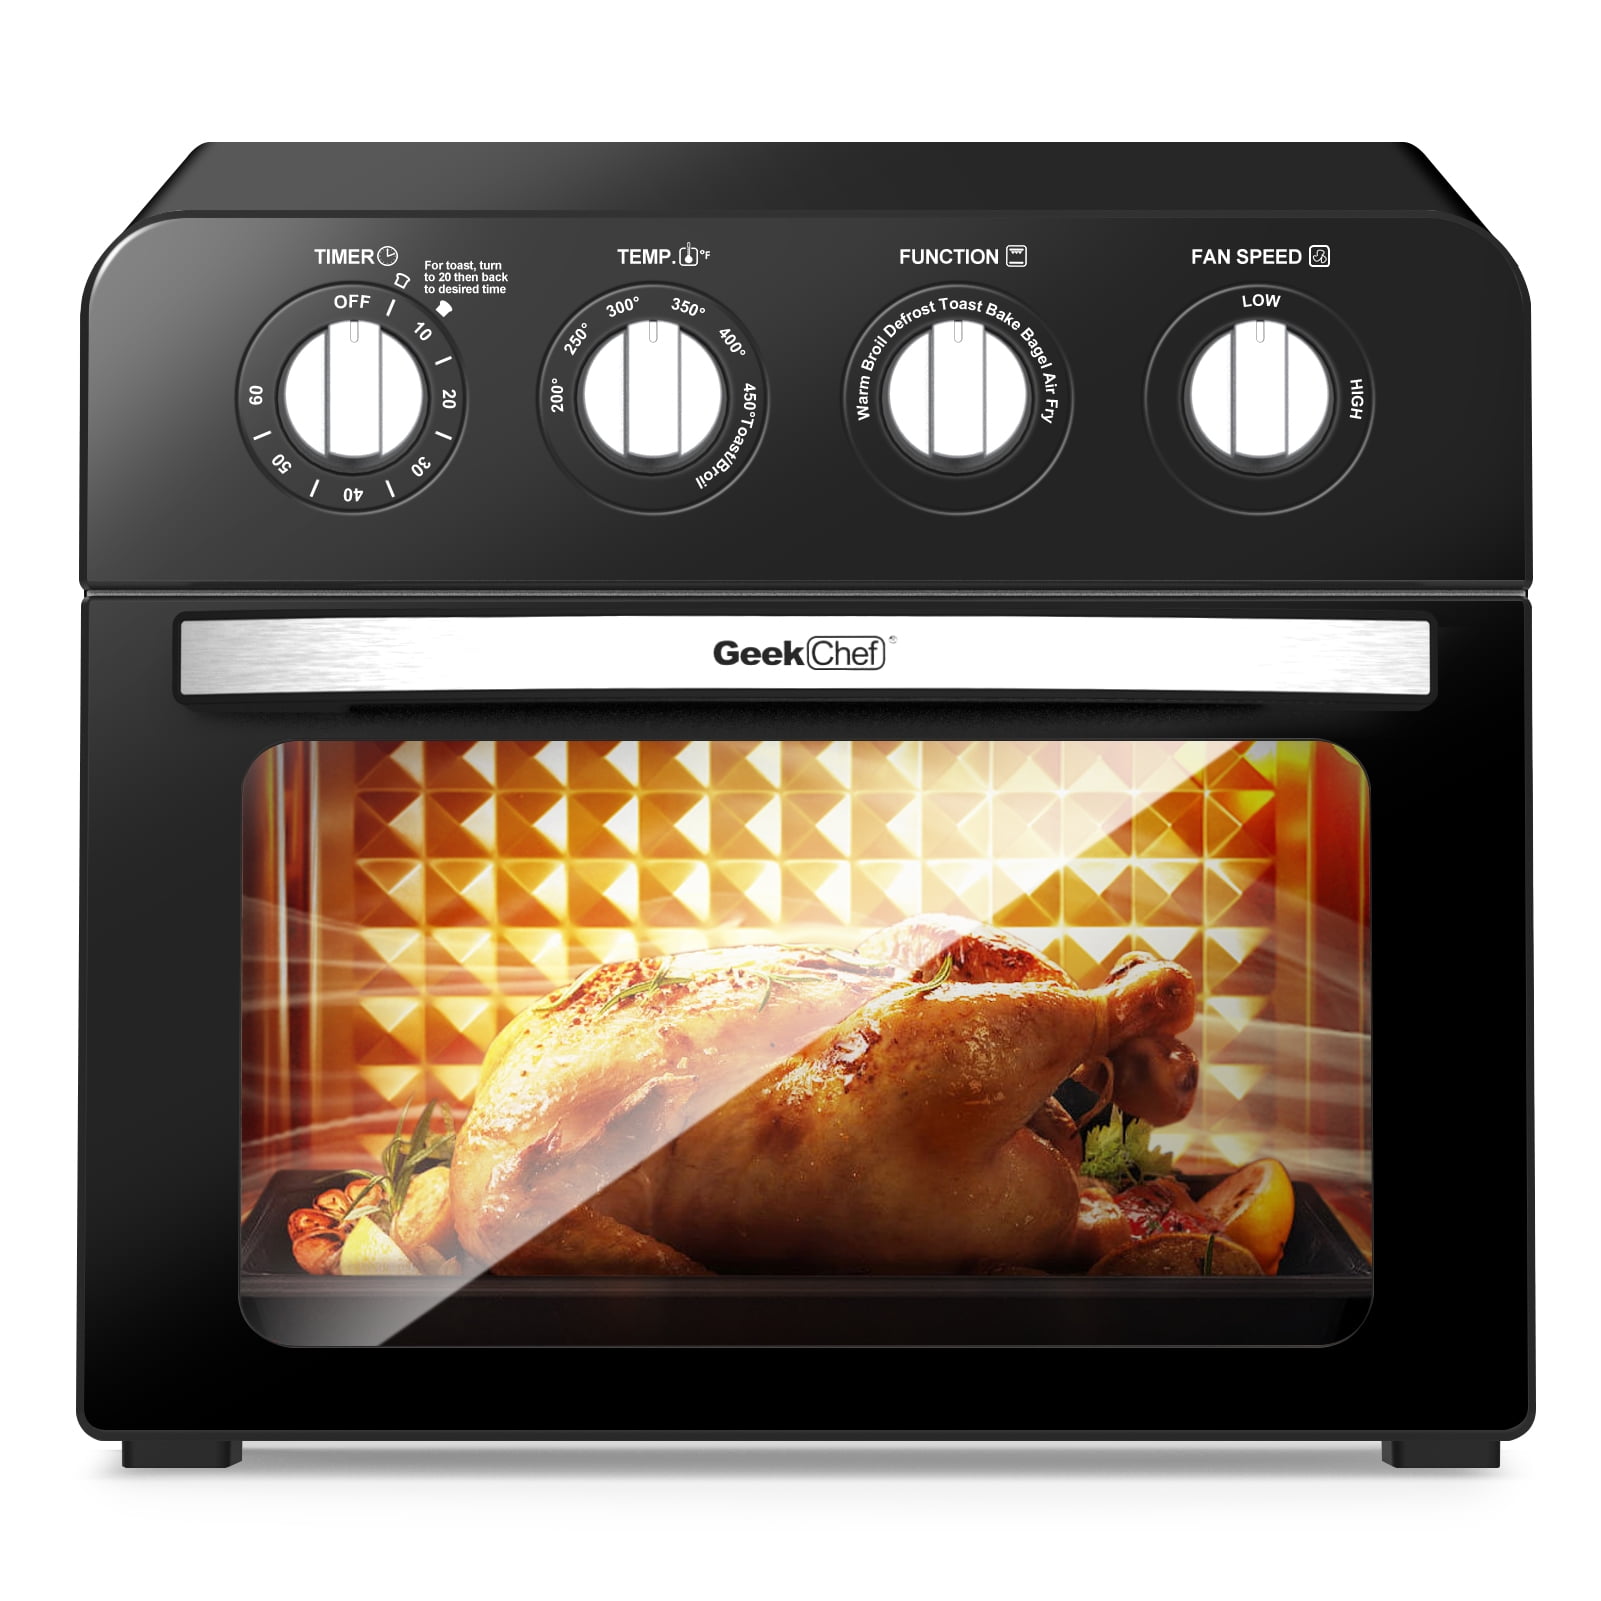 Air Fryer Oven Double French Doors Bake, Grill Roast Broil Rotisserie Toast  Warm Air Fry, Dehydrate 1500 Watts with 25 Recipes - AliExpress